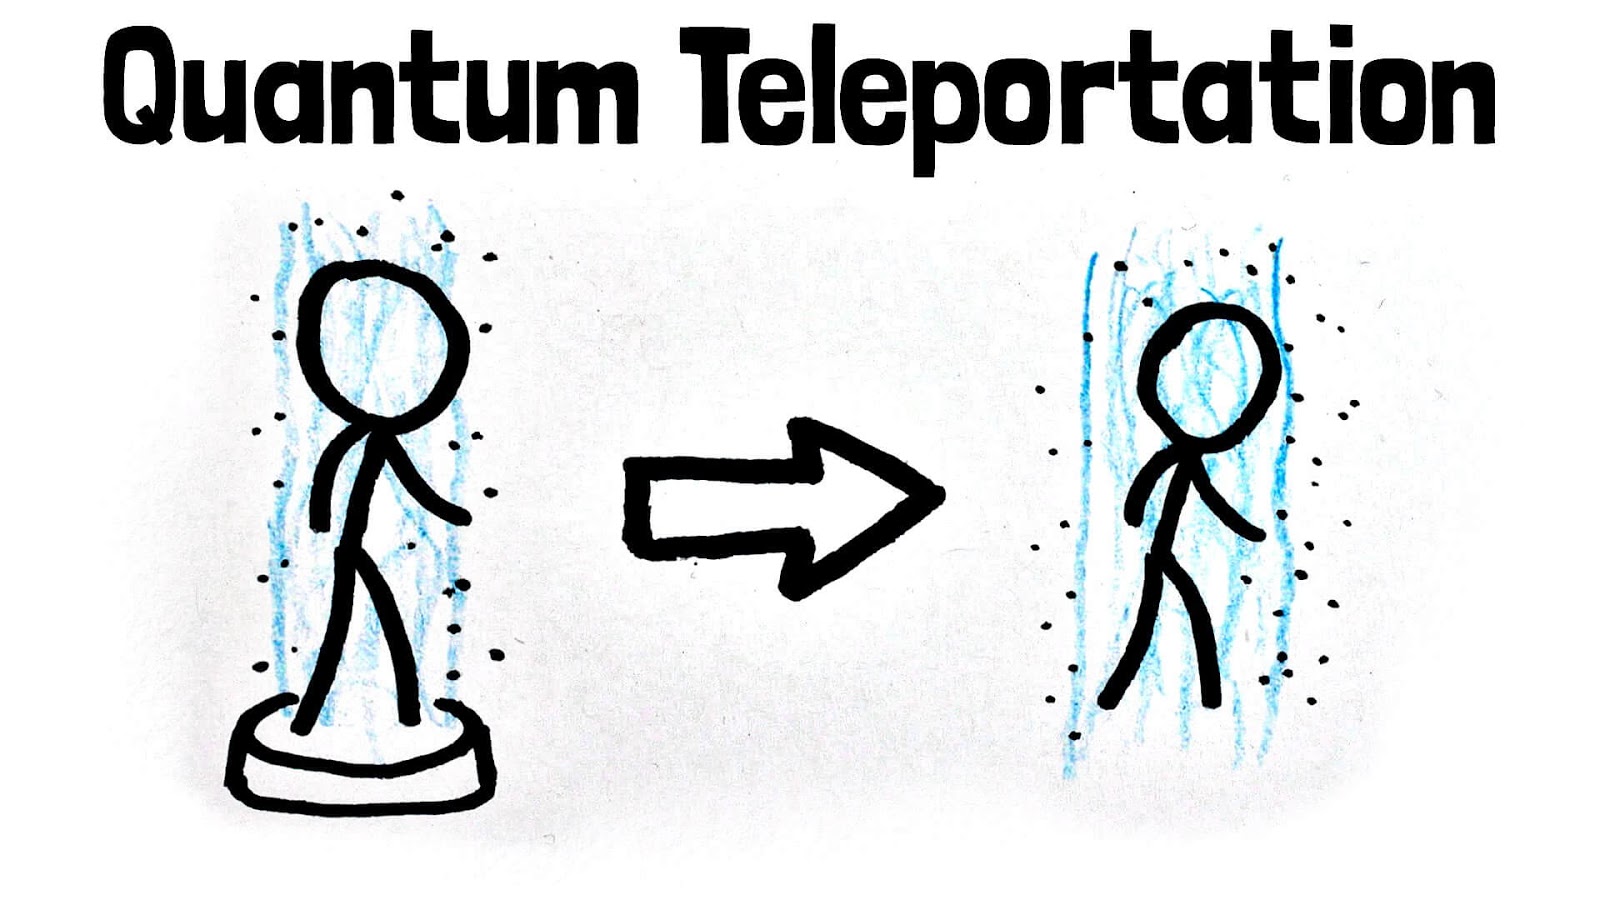 Teleportation Using Quantum Physics Has Now Become Reality